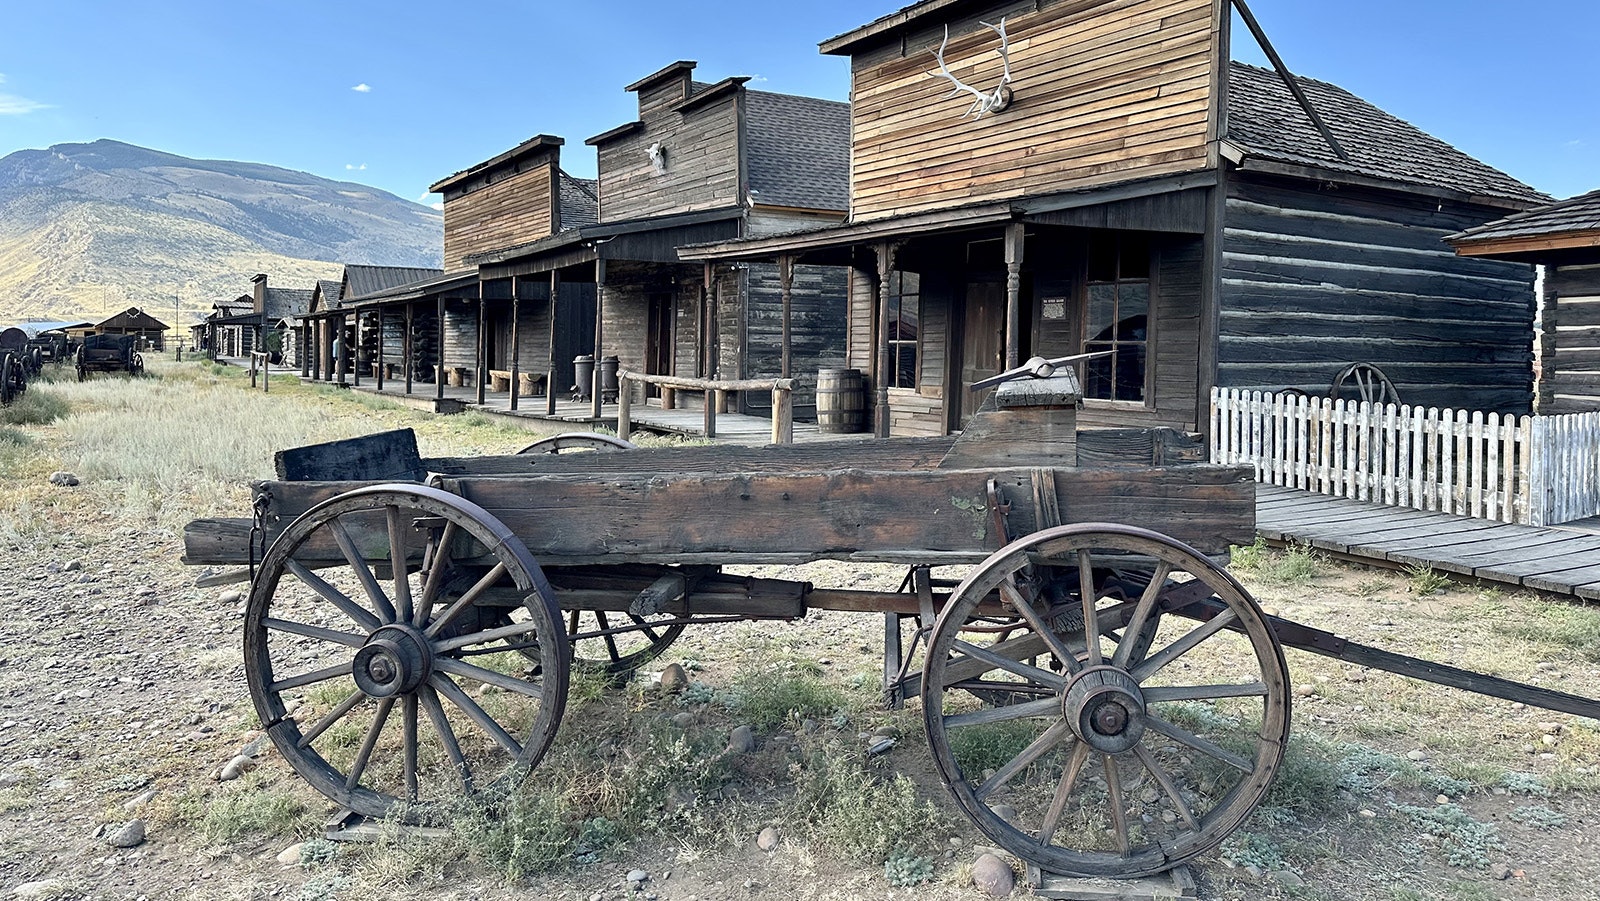 A wagon in front of a row of historic Old West buildings at Old Trail Town. There are 28 buildings, dating from between 1879 and 1901, and over 100 historic horse-drawn vehicles.